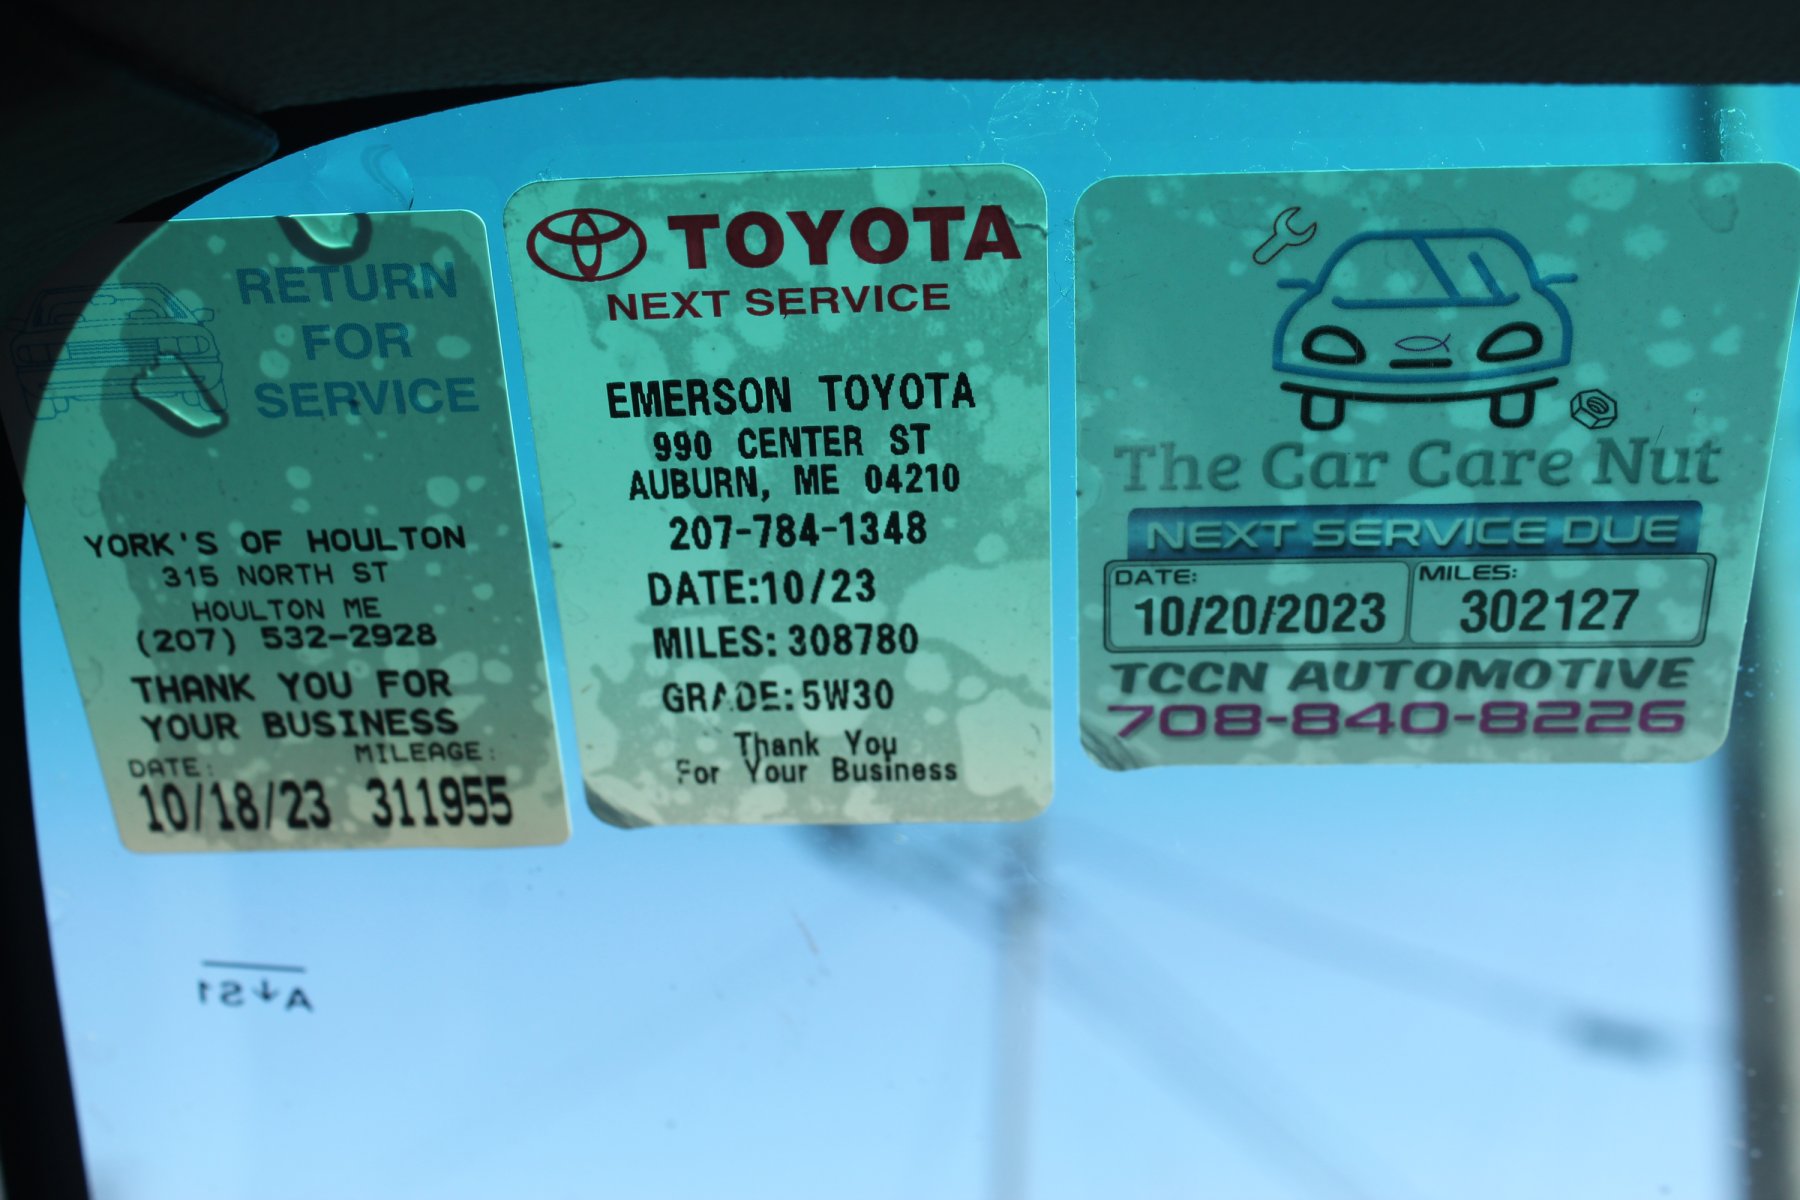 Maine yota service reminders + TCCN in Chicago car nut.JPG